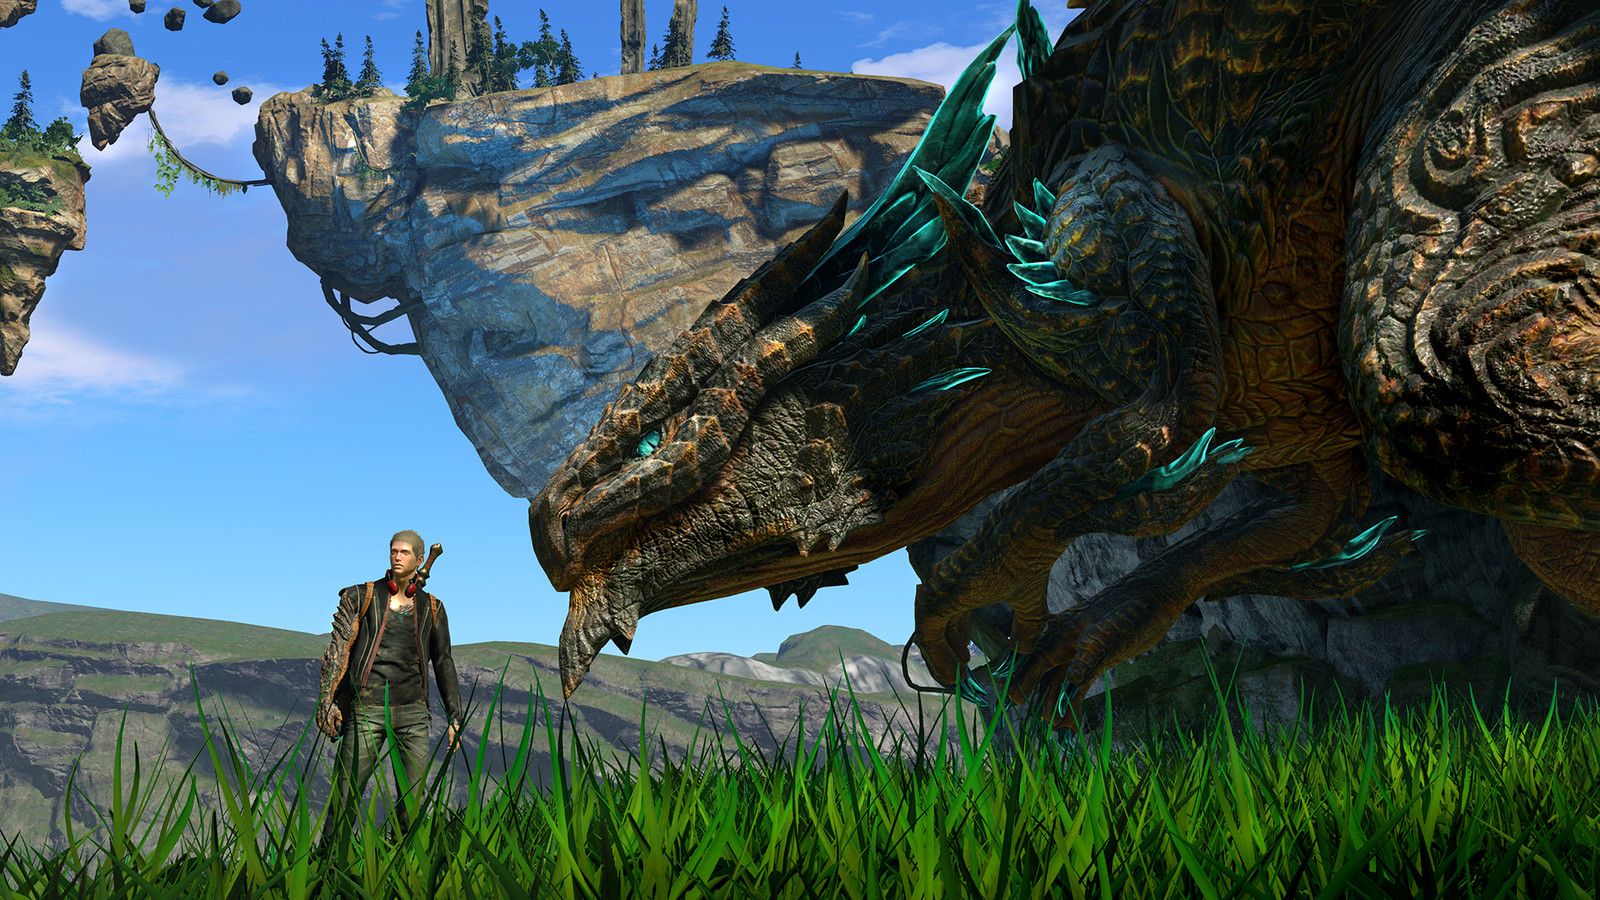 The main character stands beside their dragon in the canceled game Scalebound